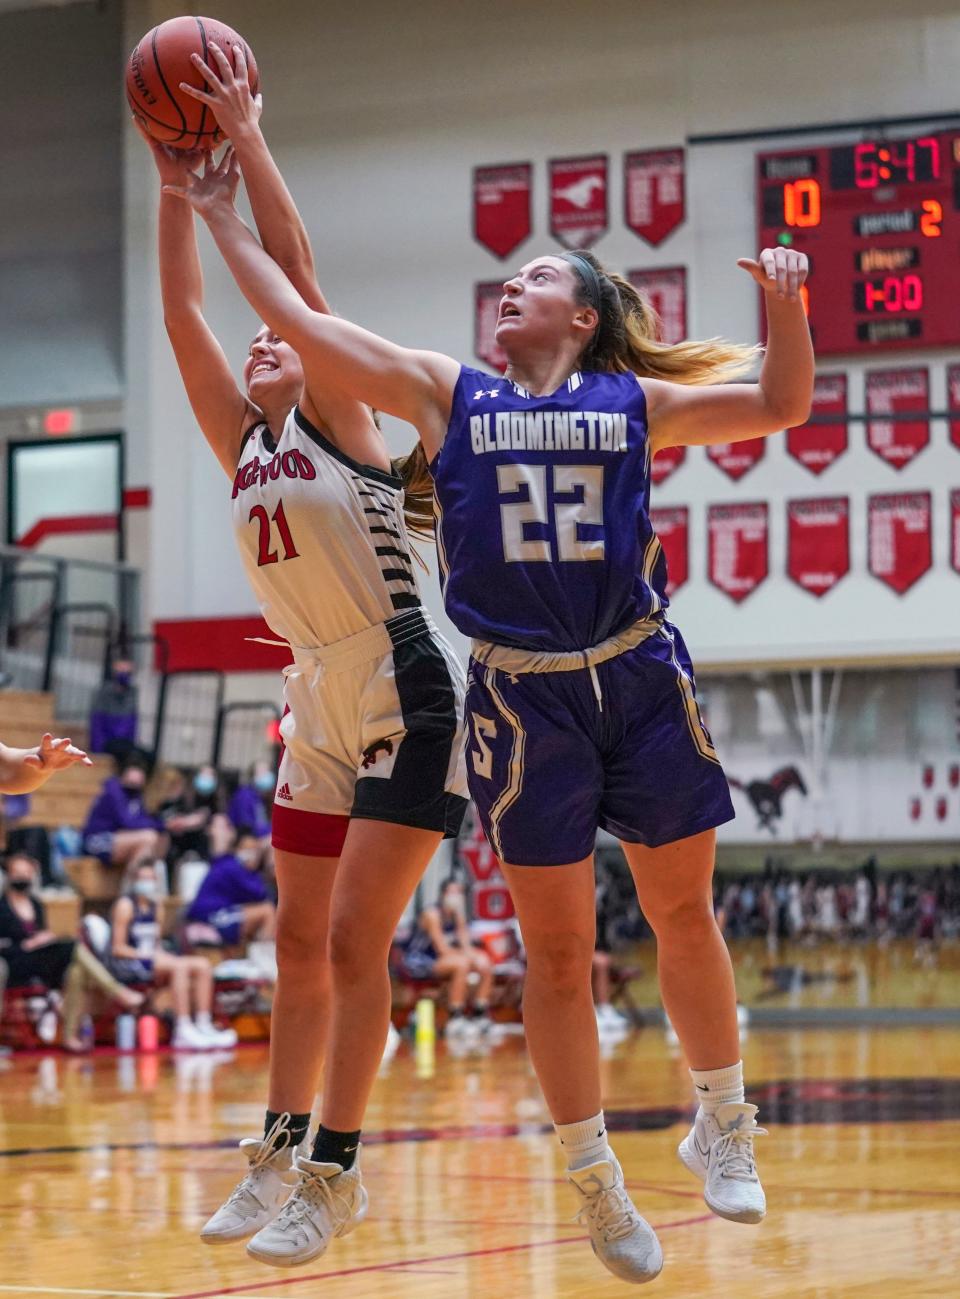 Edgewood’s Zoe Powell (21) and Bloomington South’s Brooke Grinstead (22) battle for a rebound during Tuesday’s game in Ellettsville.